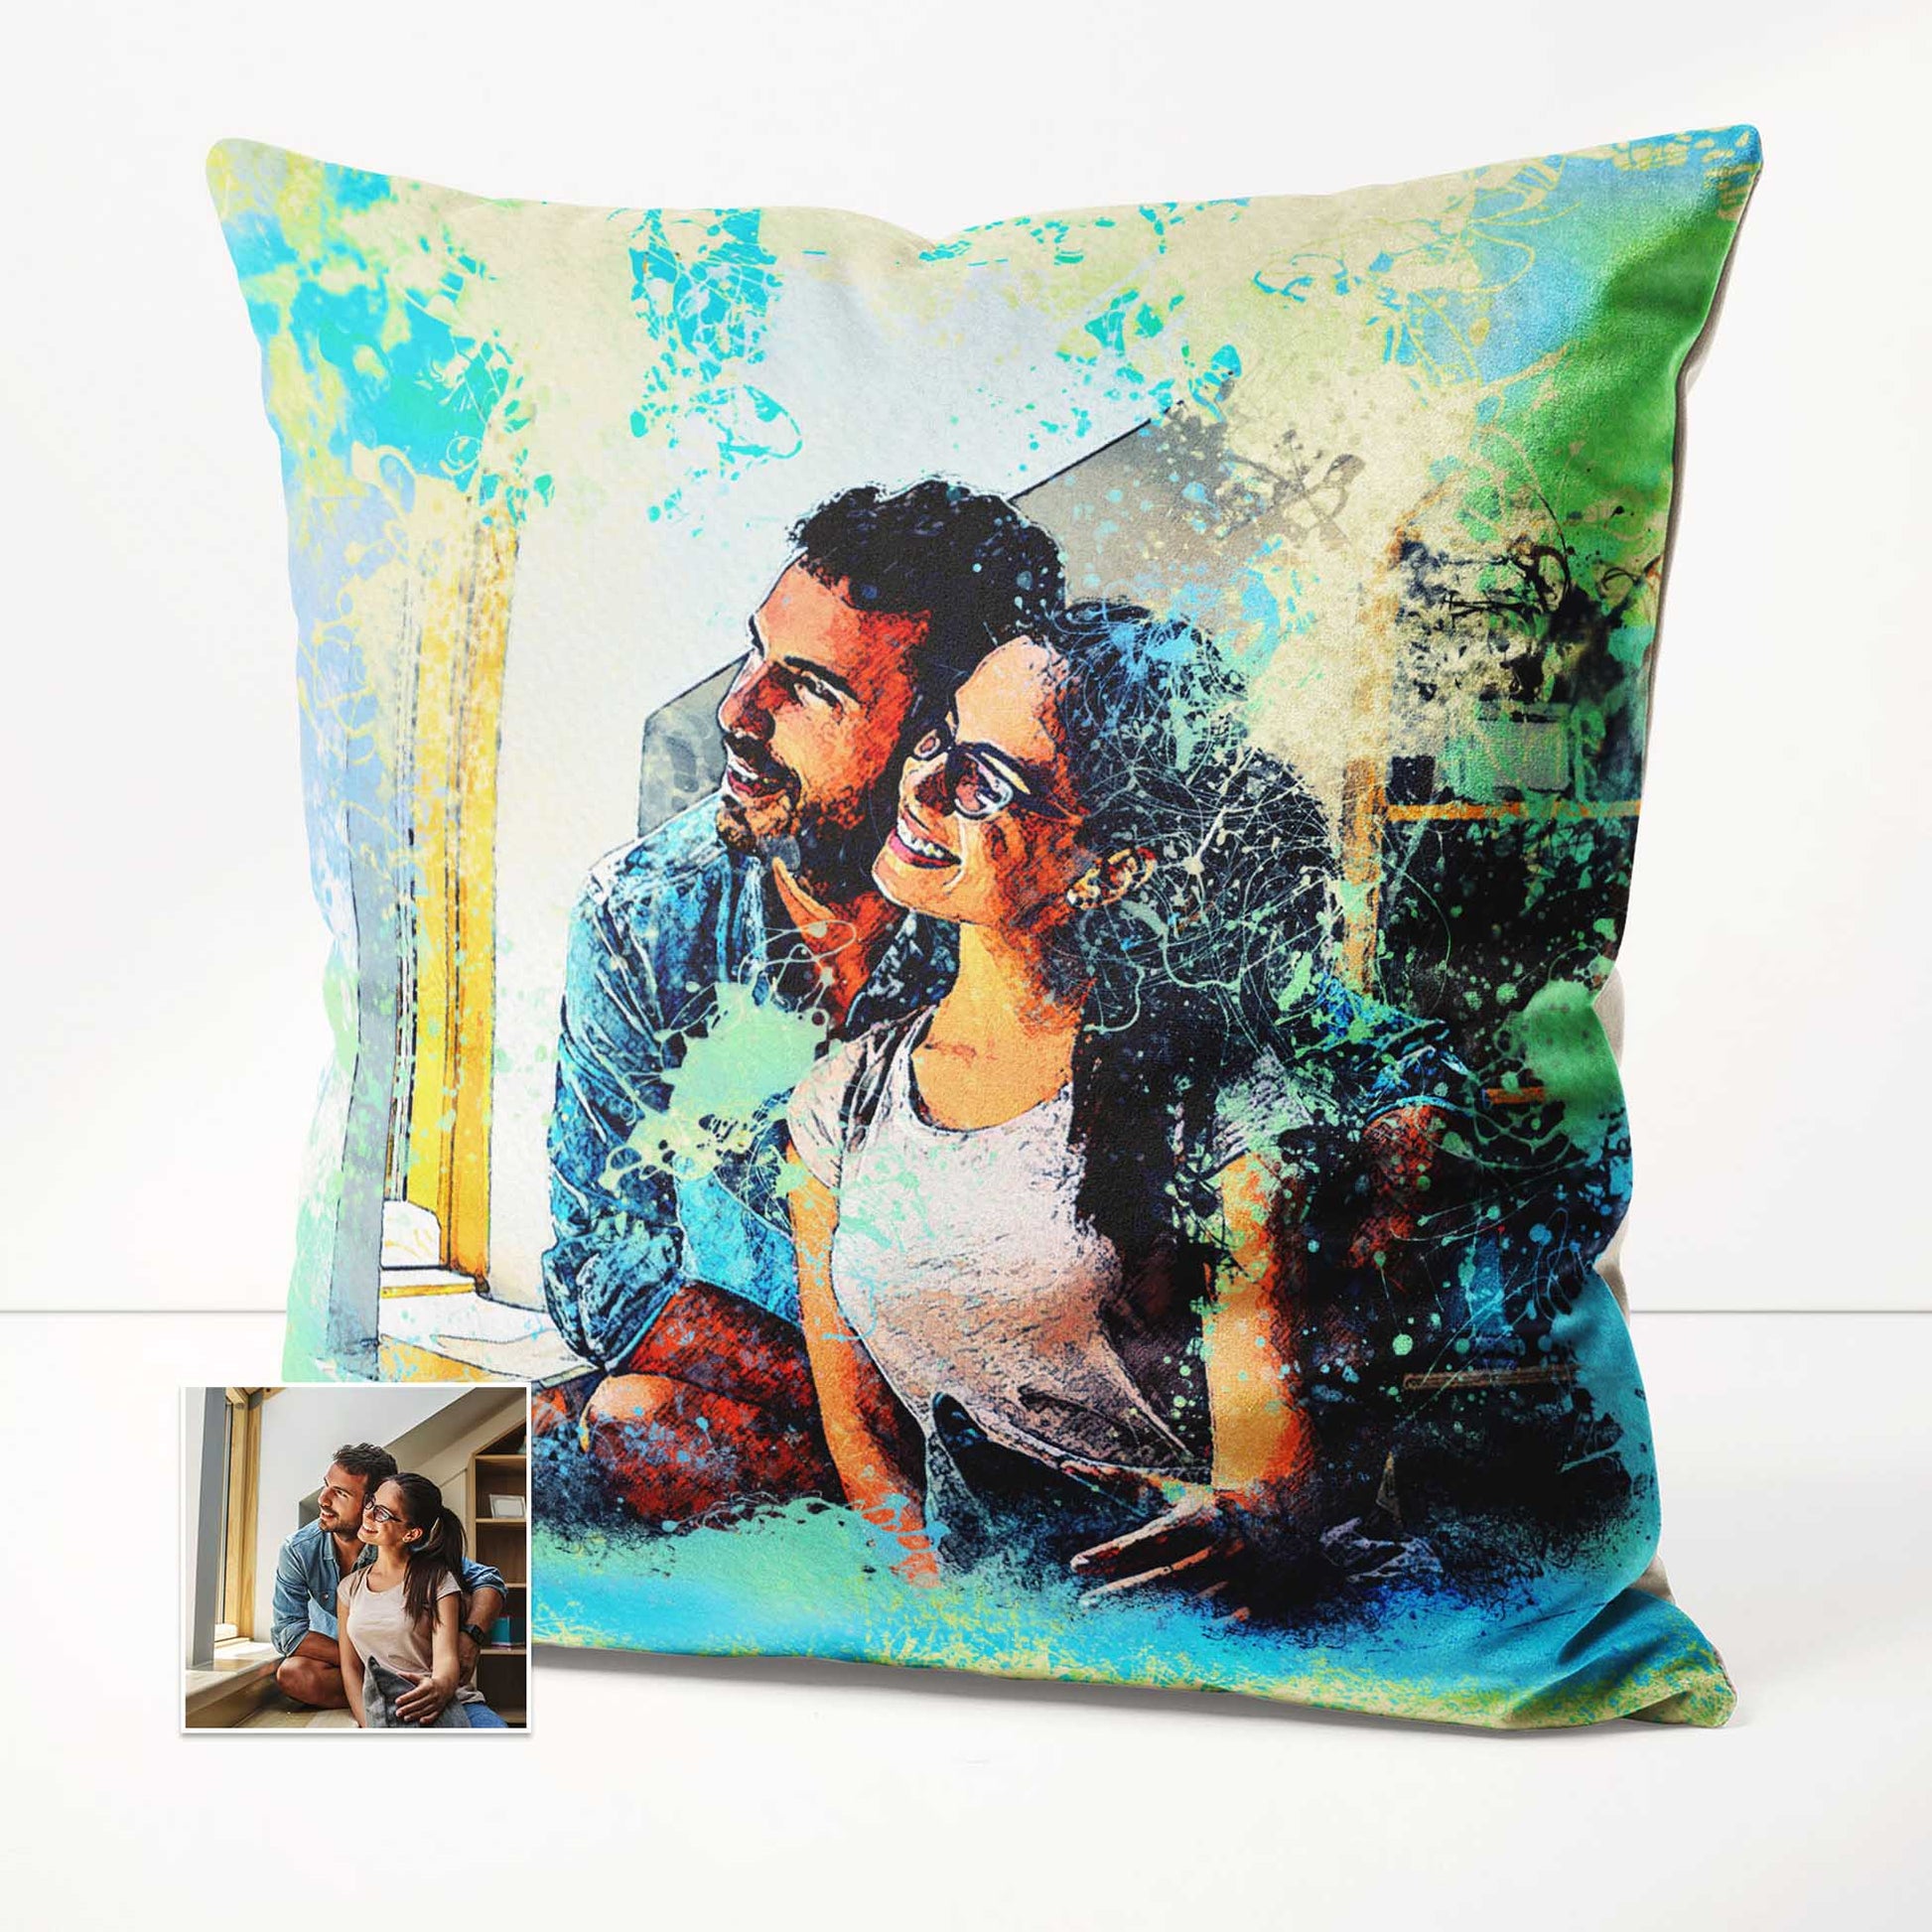 Add a splash of creativity to your space with the Personalised Watercolor Splash Cushion. Its cosy and inviting feel beckons you to relax and unwind. The vibrant and exciting watercolor print, combined with the option to personalise it 